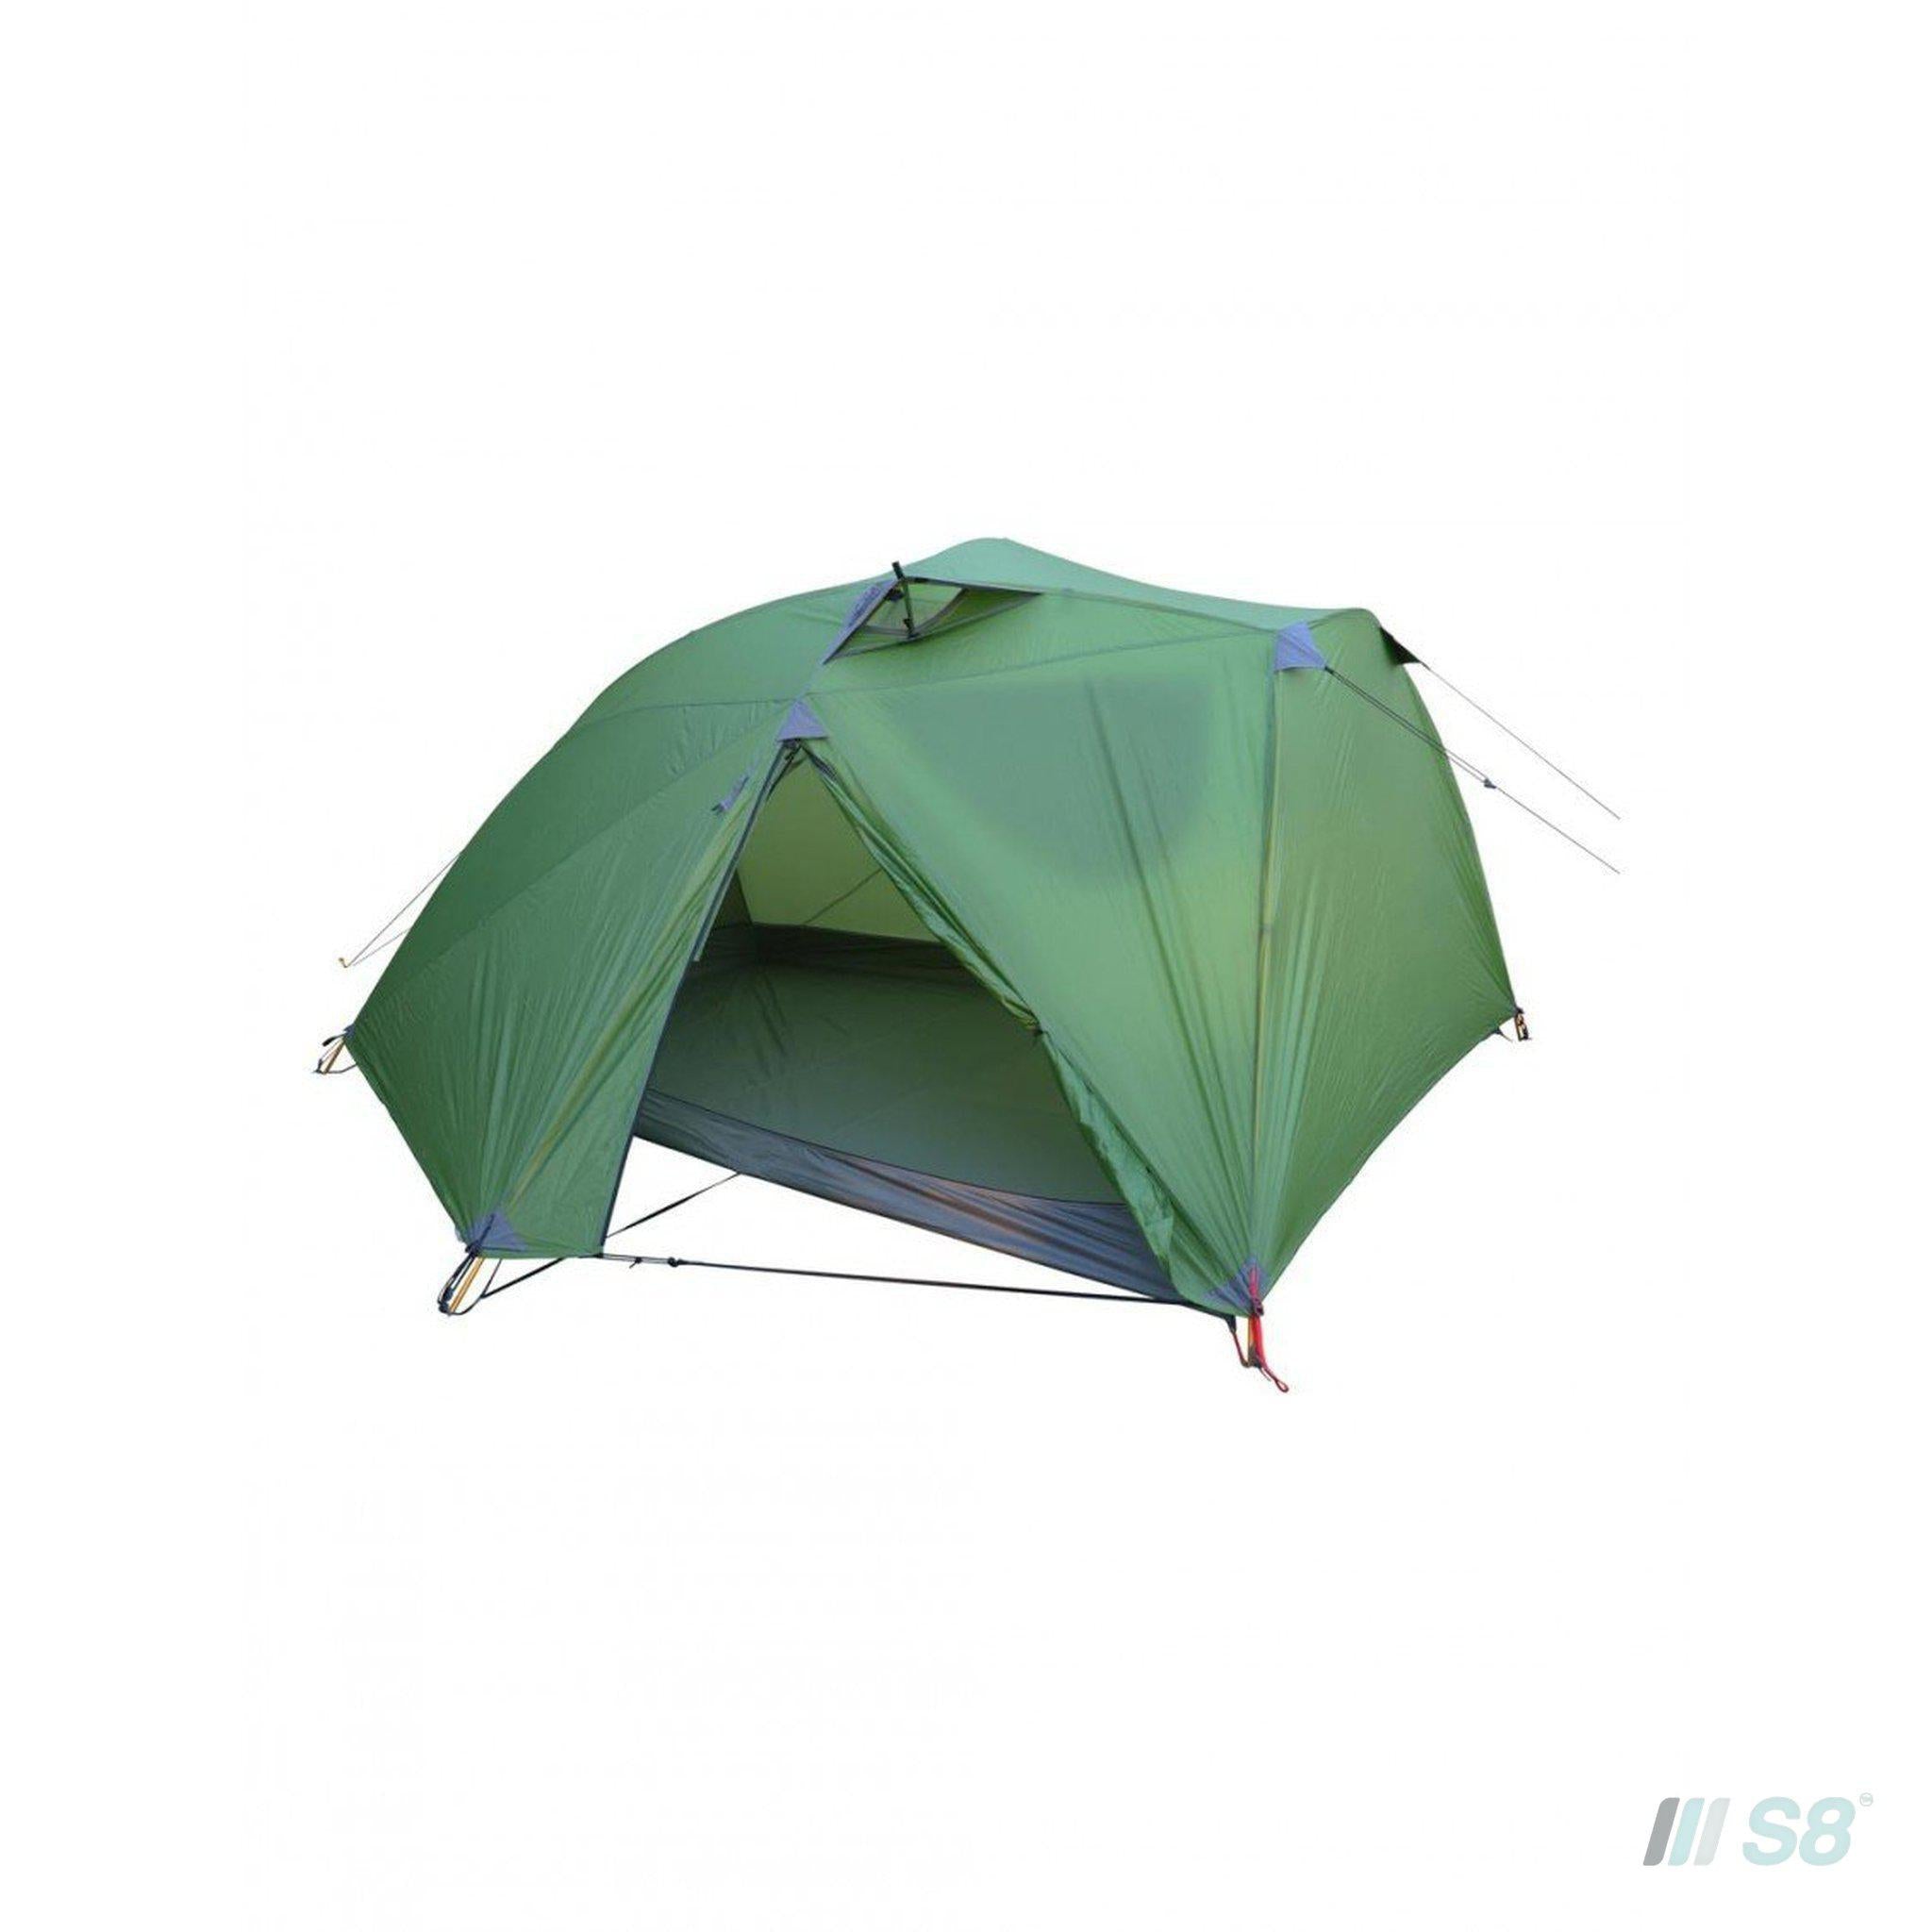 Wilderness Equipment Space 3 (mesh inner)-Wilderness Equipment-S8 Products Group